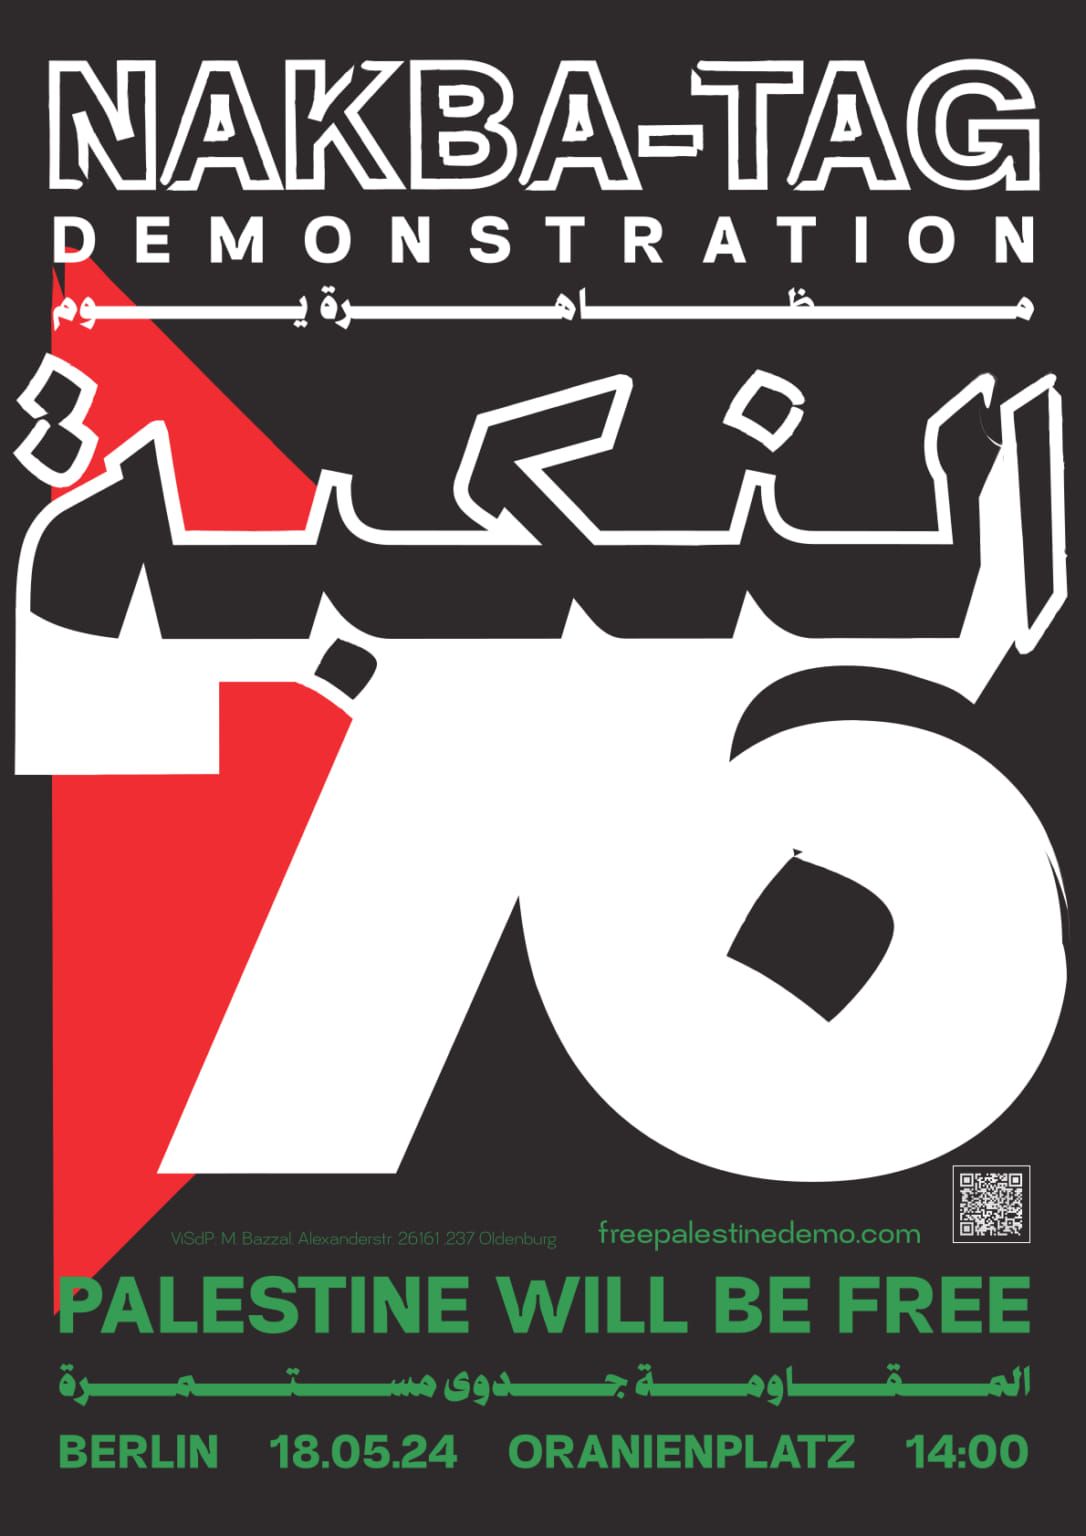 CALL FOR THE NAKBA-DAY DEMONSTRATION \u2013 PALESTINE WILL BE FREE\n\n